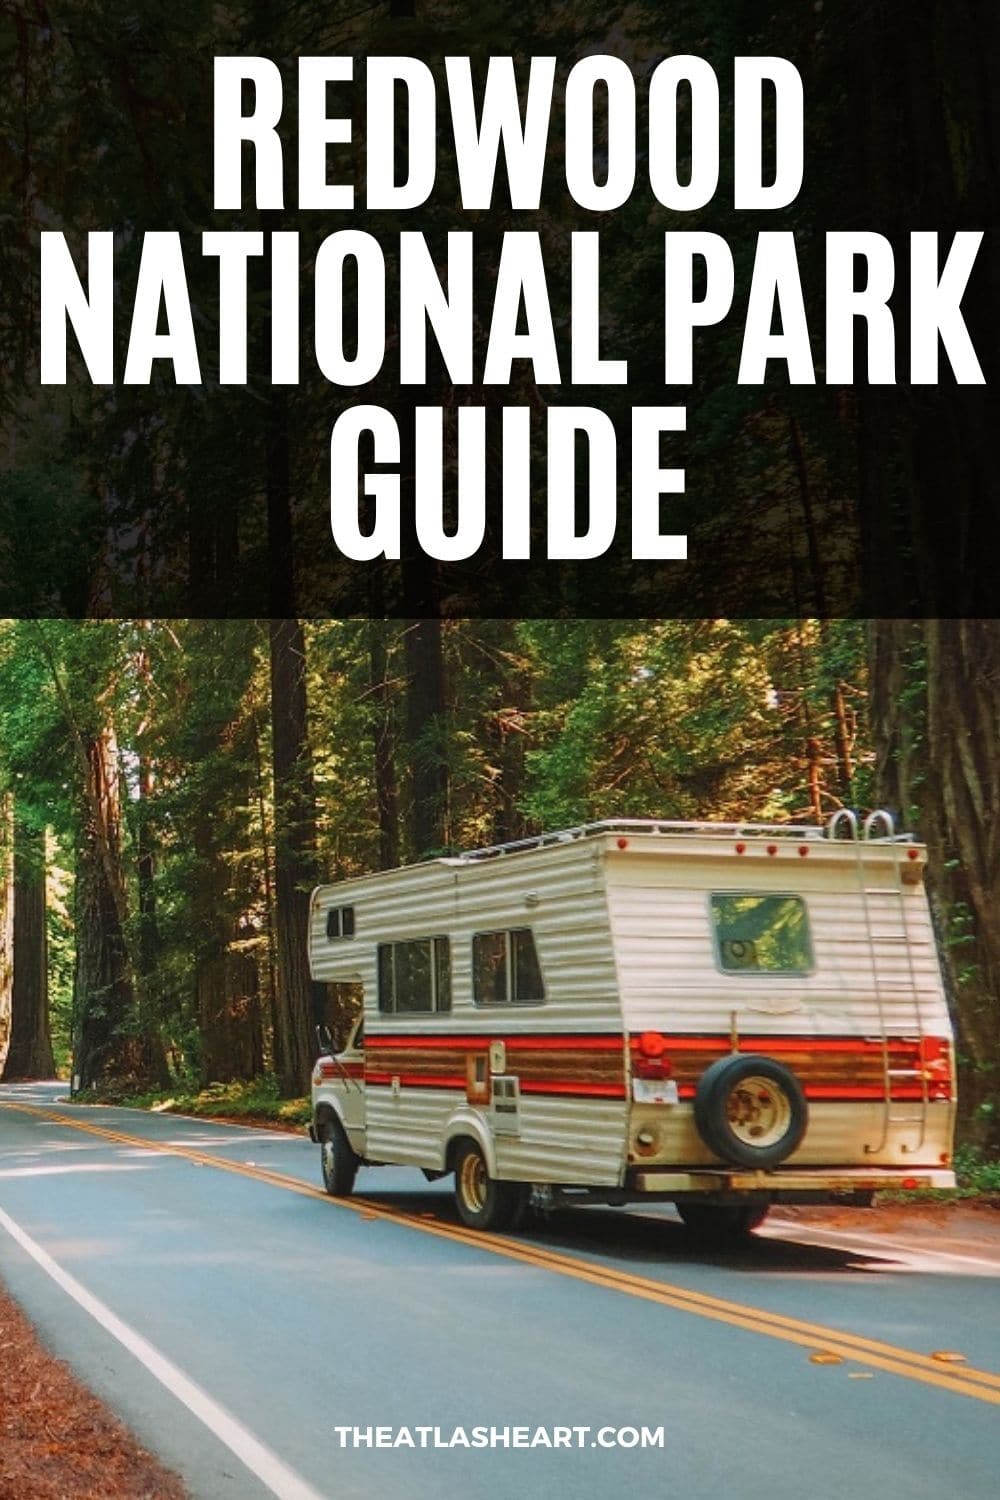 Redwood National Park Guide: Experience the Magic of the California Redwoods